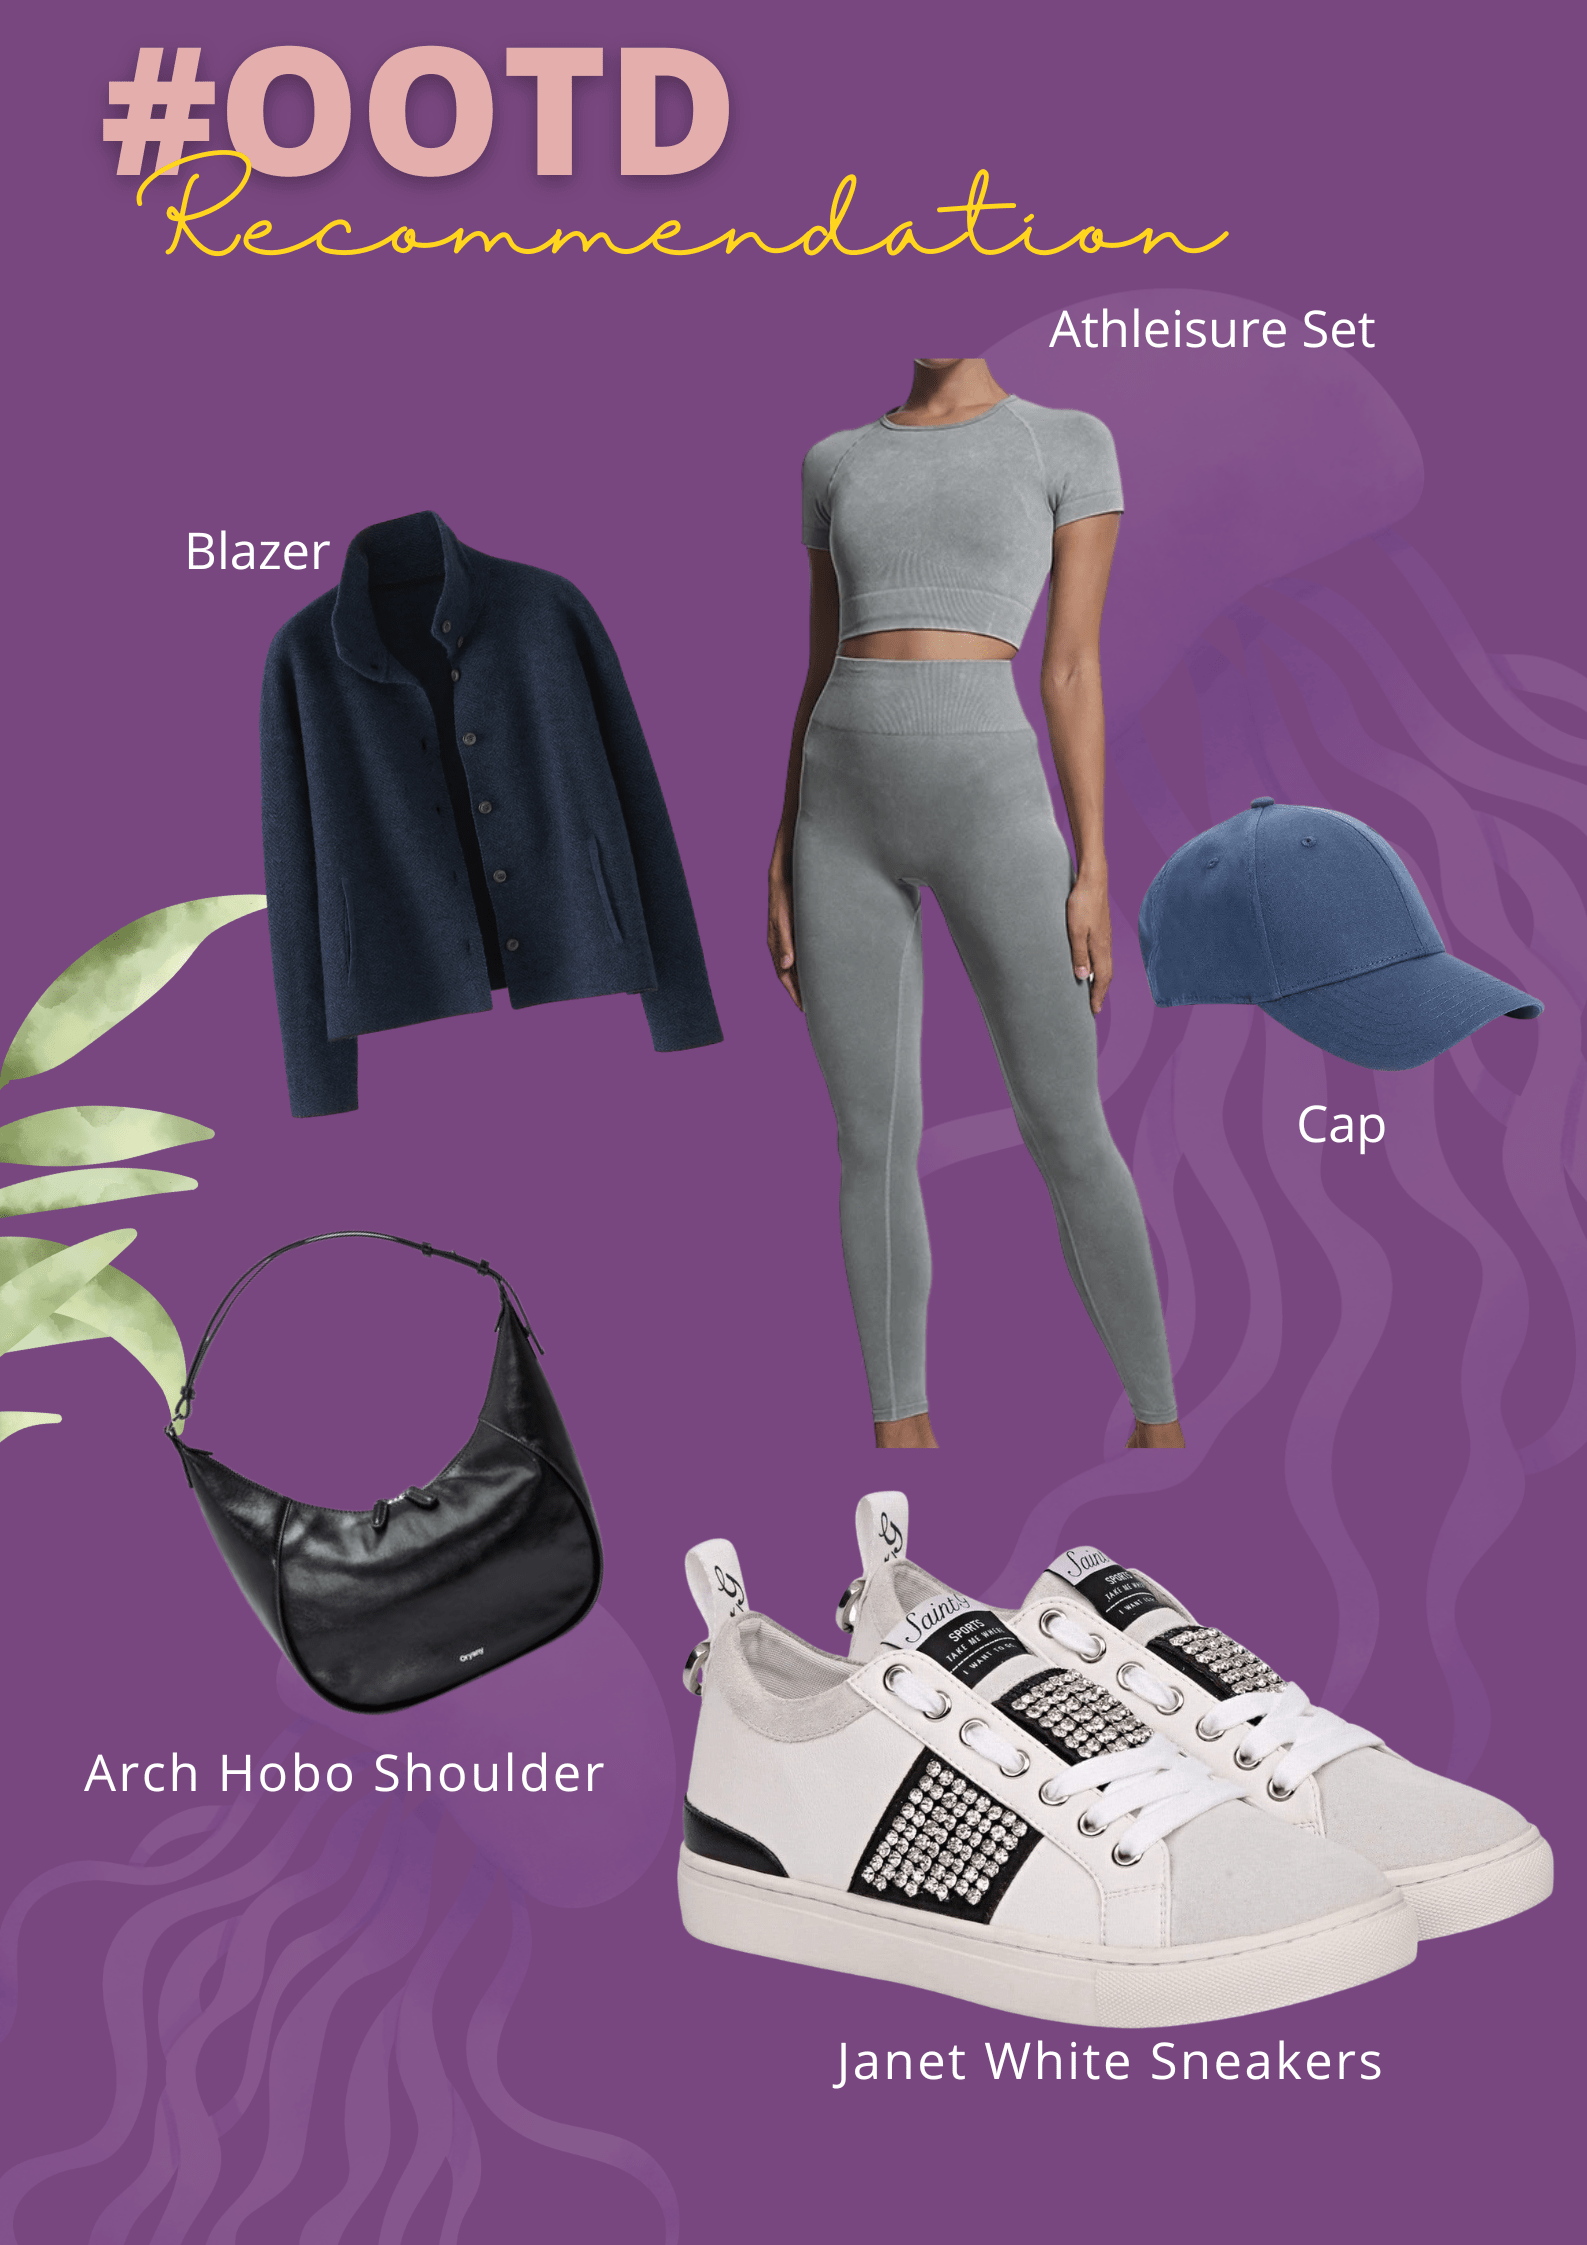 Janet White Sneakers by Saint G and Arch Hobo Shoulder by Oryany with Blazer and Athleisure Set